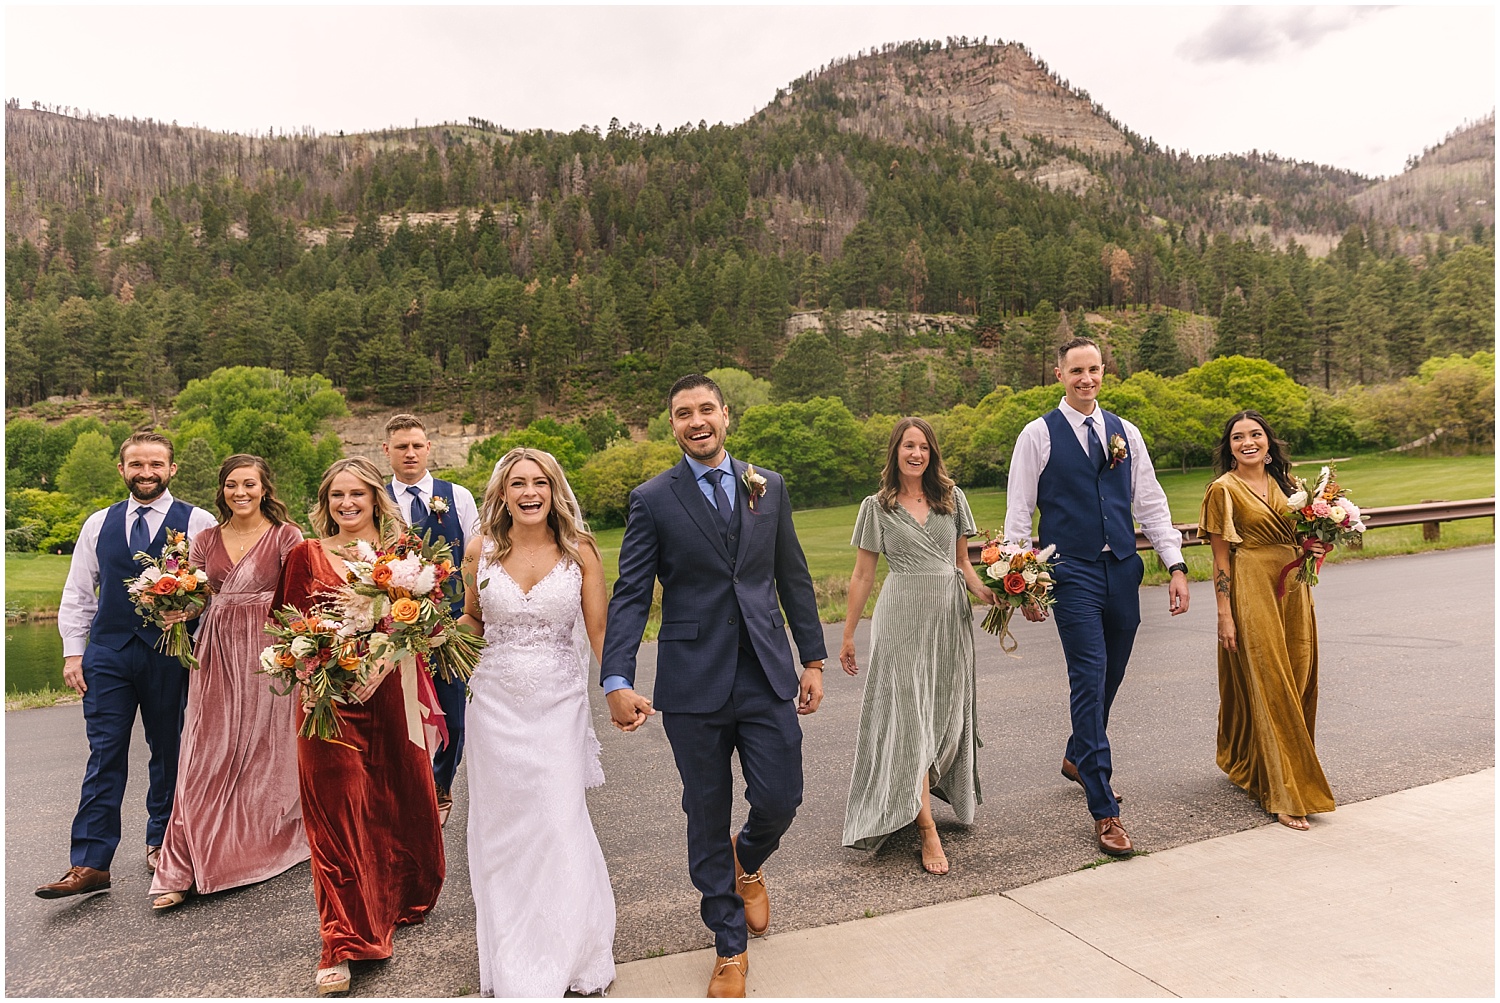 Mismatched wedding party walking across the road surrounded by mountains at Glacier Club wedding in Durango Colorado